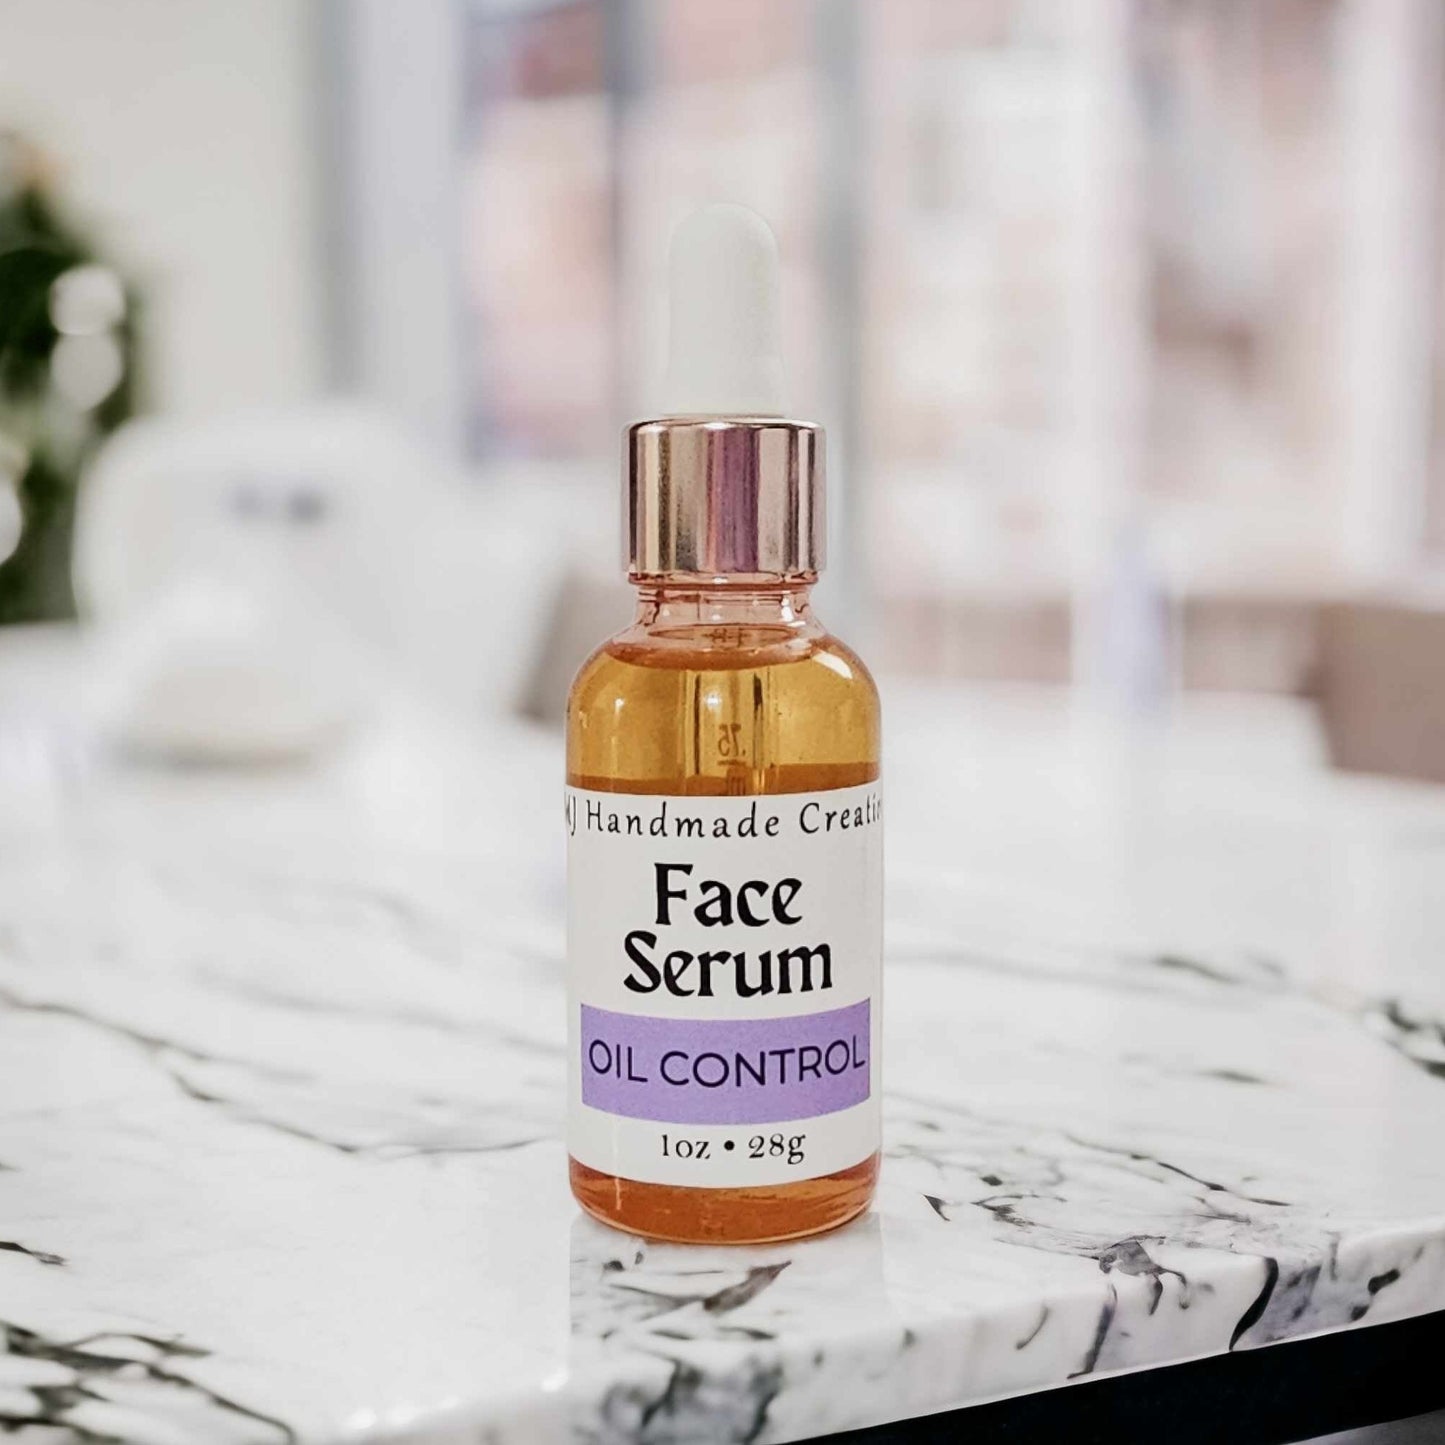 Oil Control, Face Serum for Oily Skin